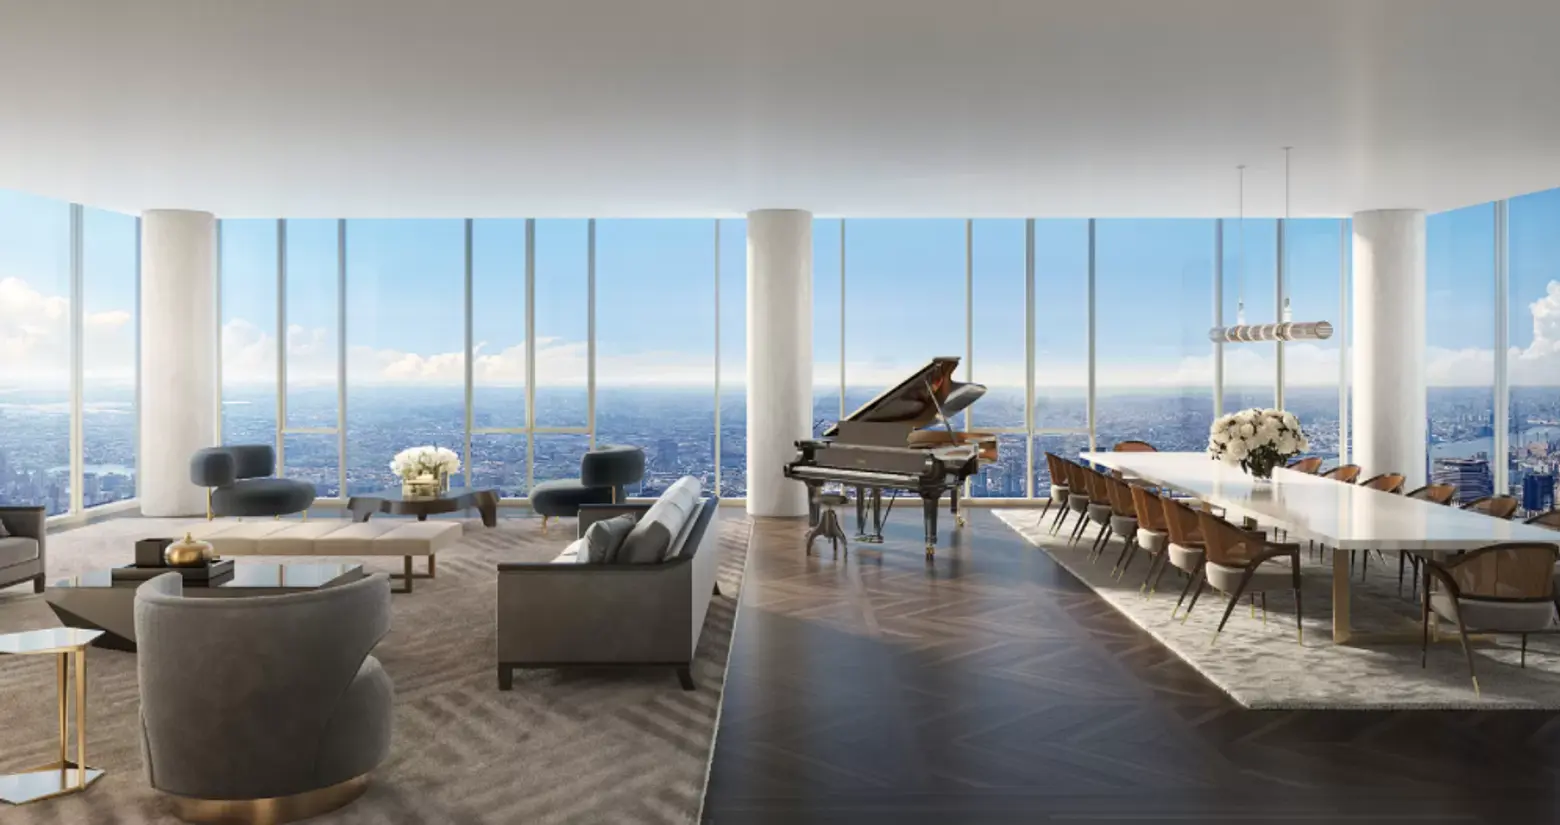 New York's Most Expensive Apartment Can Be Yours for Just $250 Million